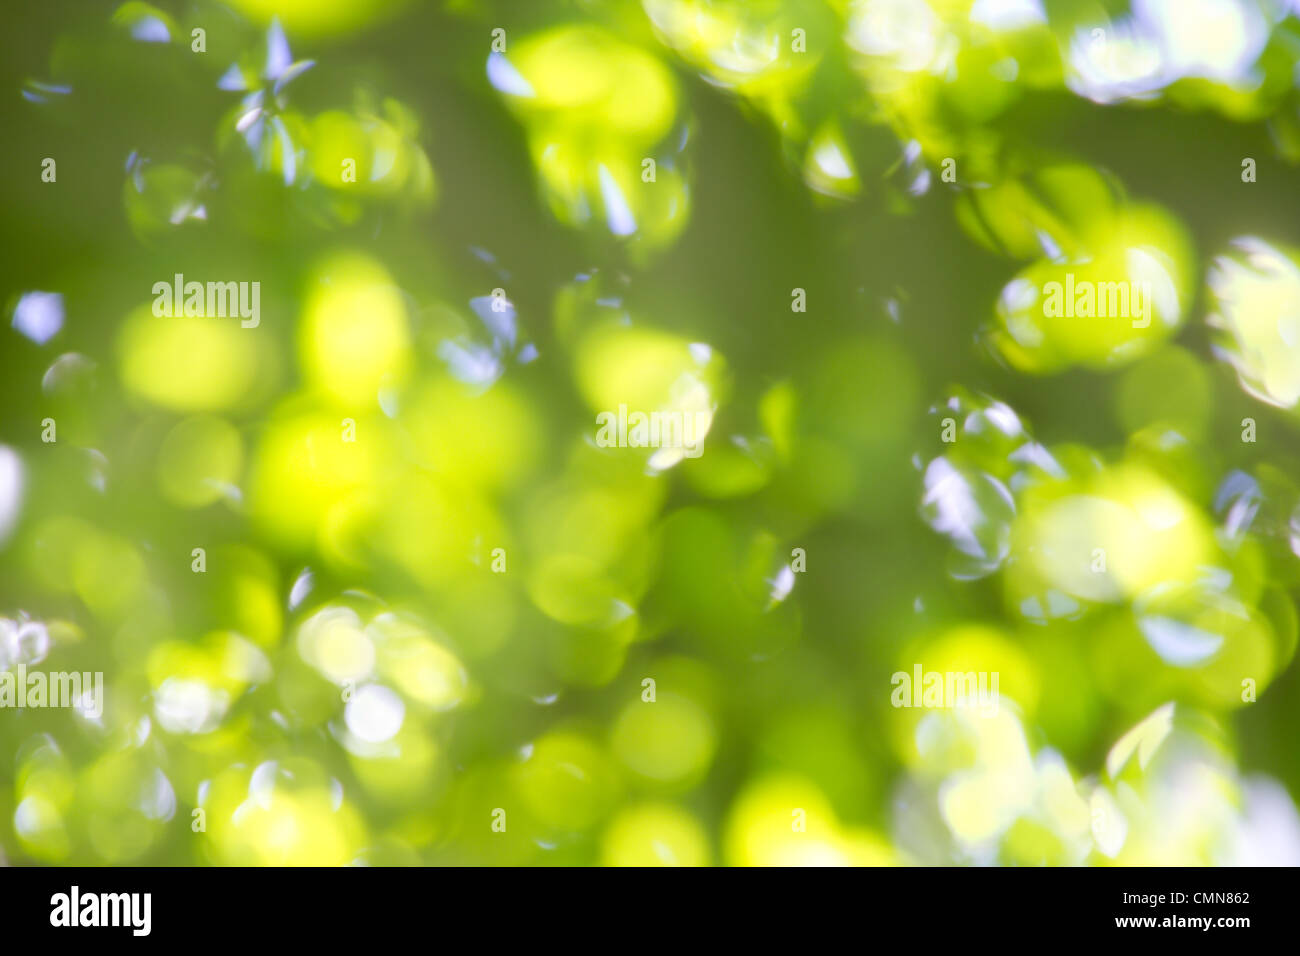 Yellow and Green Blurry Leaf Background Stock Photo - Alamy